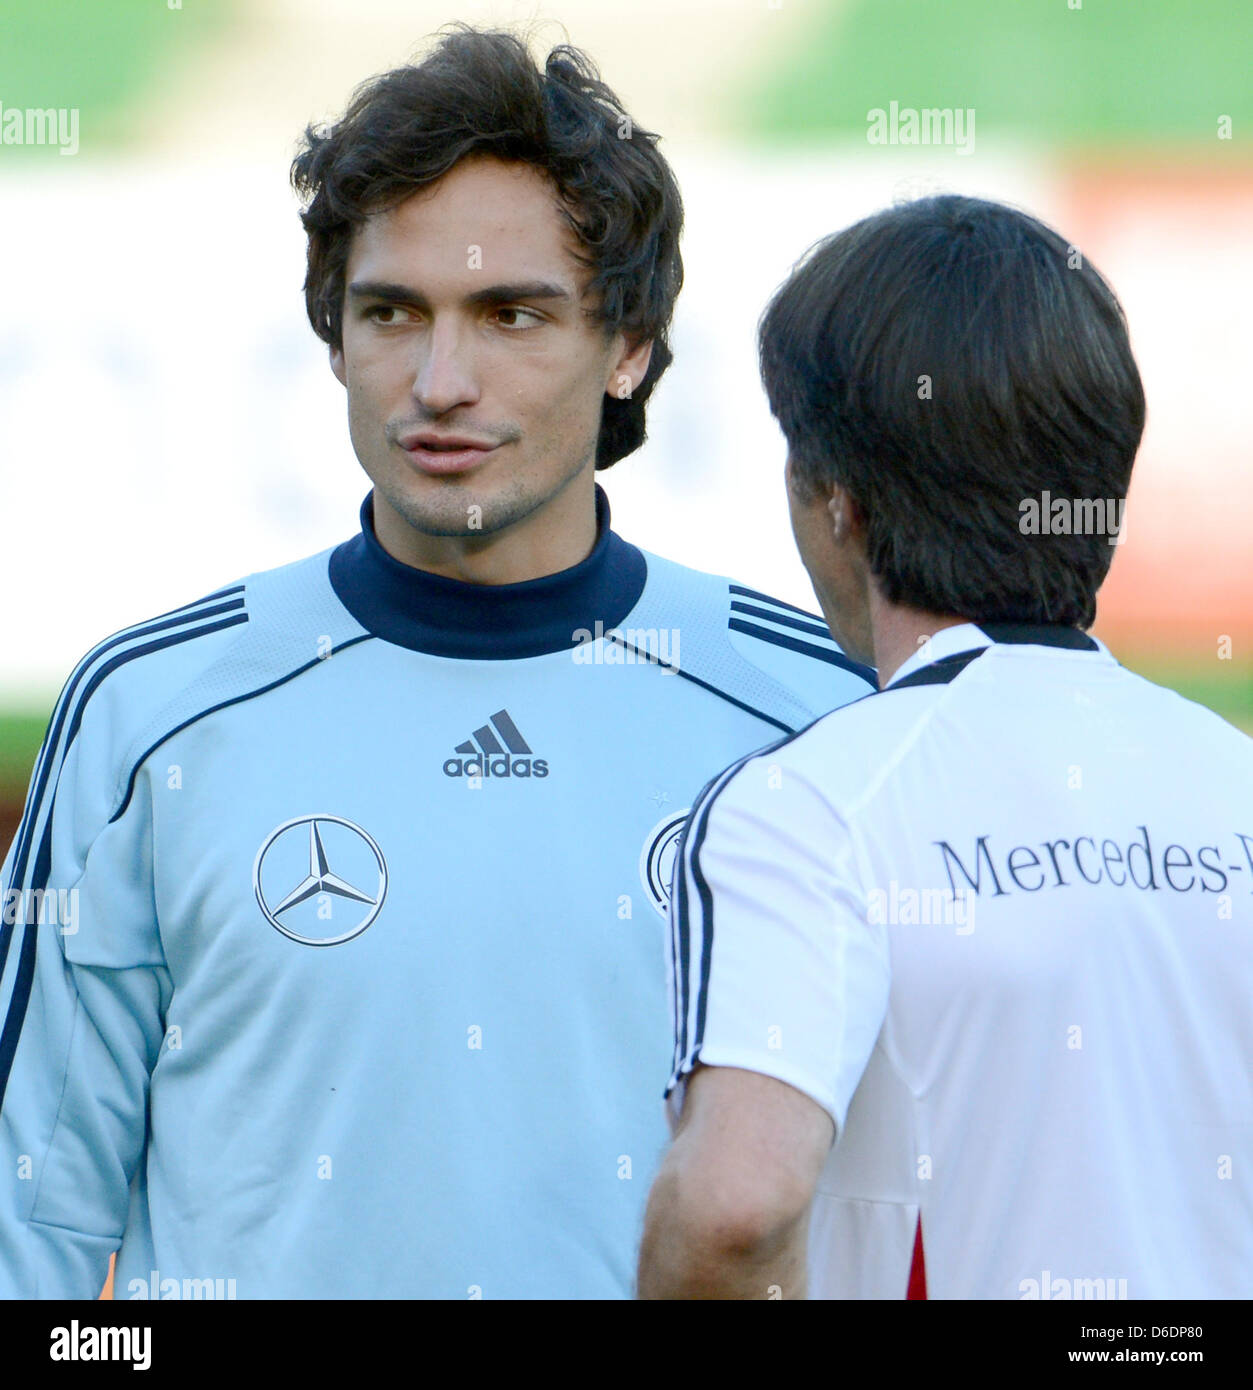 Germany's head coach Joachim Loew (R) talks to player Mats Hummels during a practice session of the national soccer team at Ernst Happel Stadium in Vienna, Austria, 10 September 2012. The German national soccer team prepares for its upcoming FIFA World Cup 2014 qualification match against Austria on 11 September. Photo: Peter Steffen Stock Photo